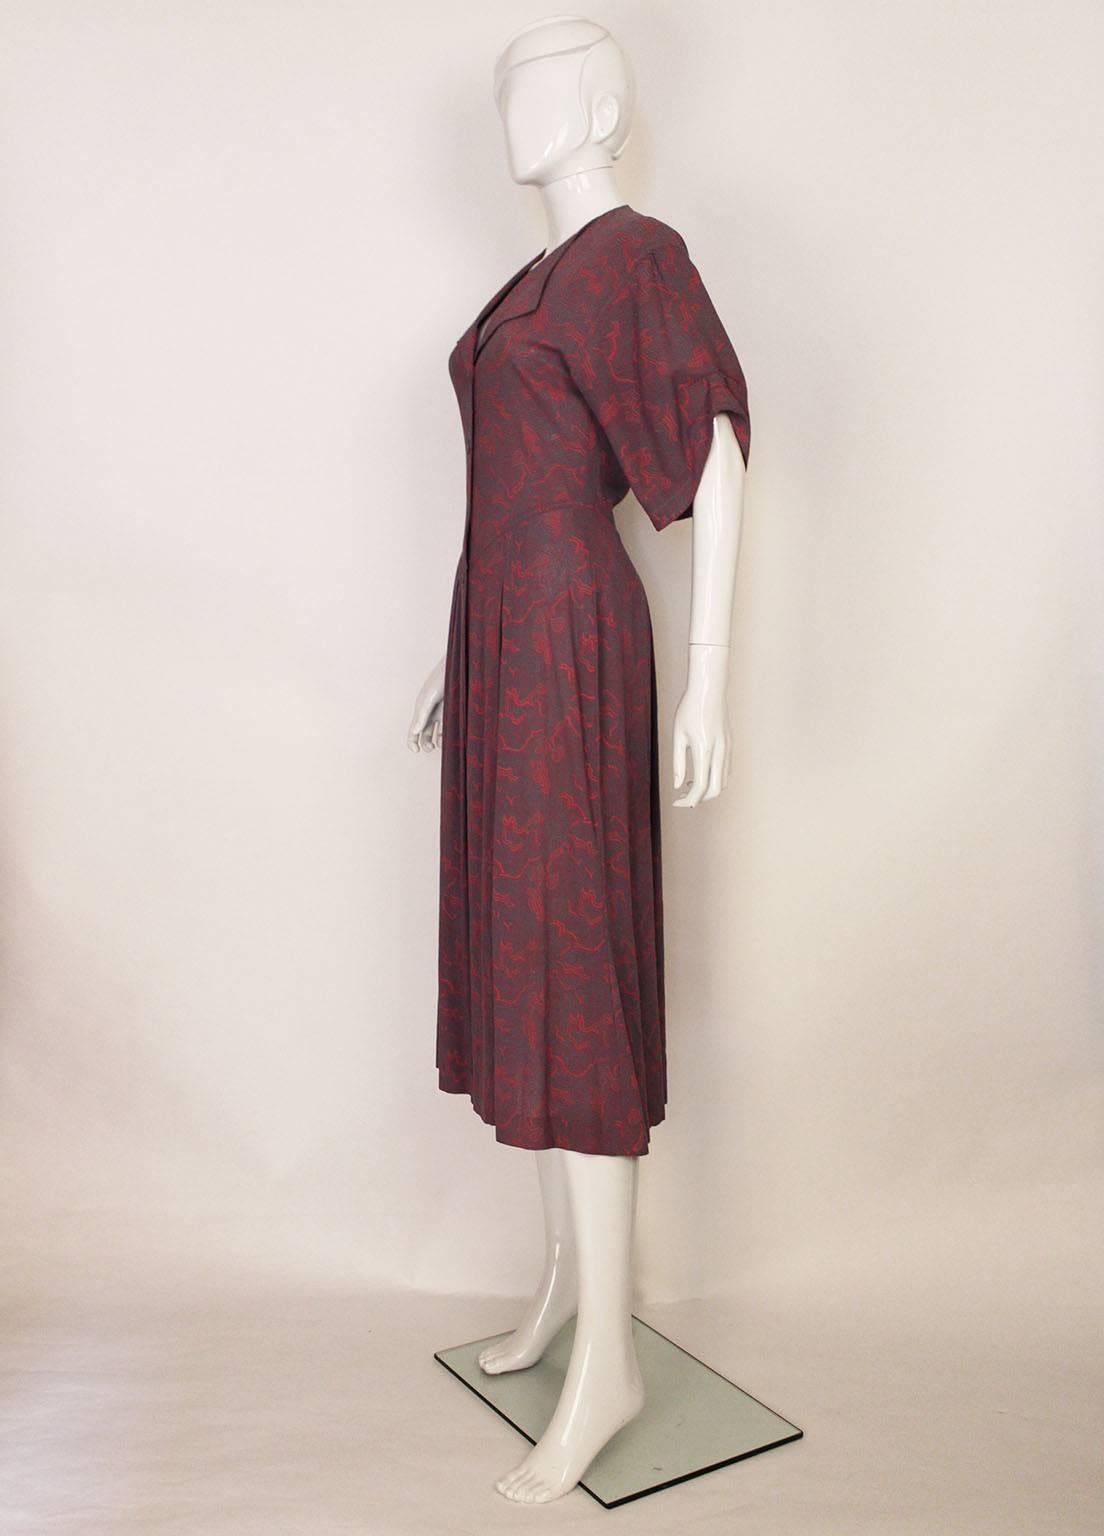 An elegant and easy to wear dress by British designer Jean Muir.
The dress is made of cotton with a wonderful pink and purple print, and the buttons are hand painted.The dress is fitted to the body, and the skirt flares at the hip. There is a full